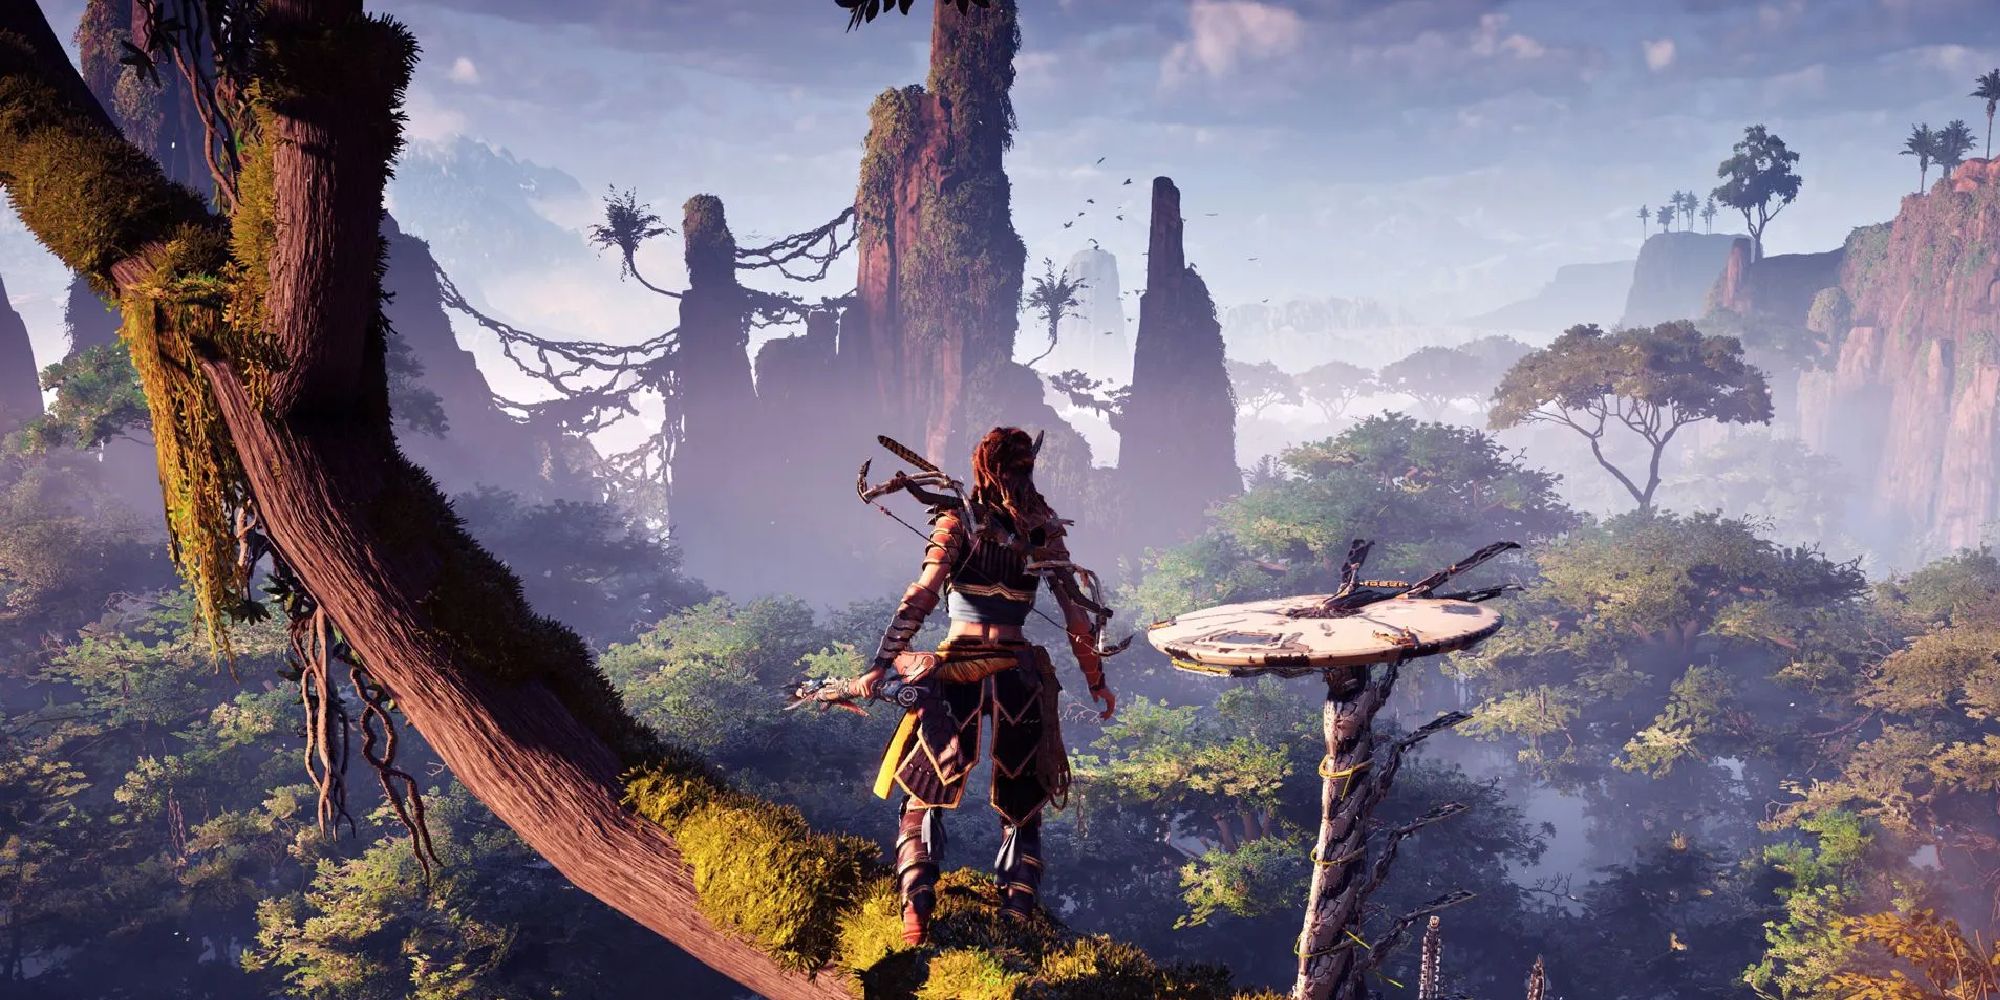 Aloy stands on a thick tree branch, overlooking the jungle-like world in Horizon Zero Dawn